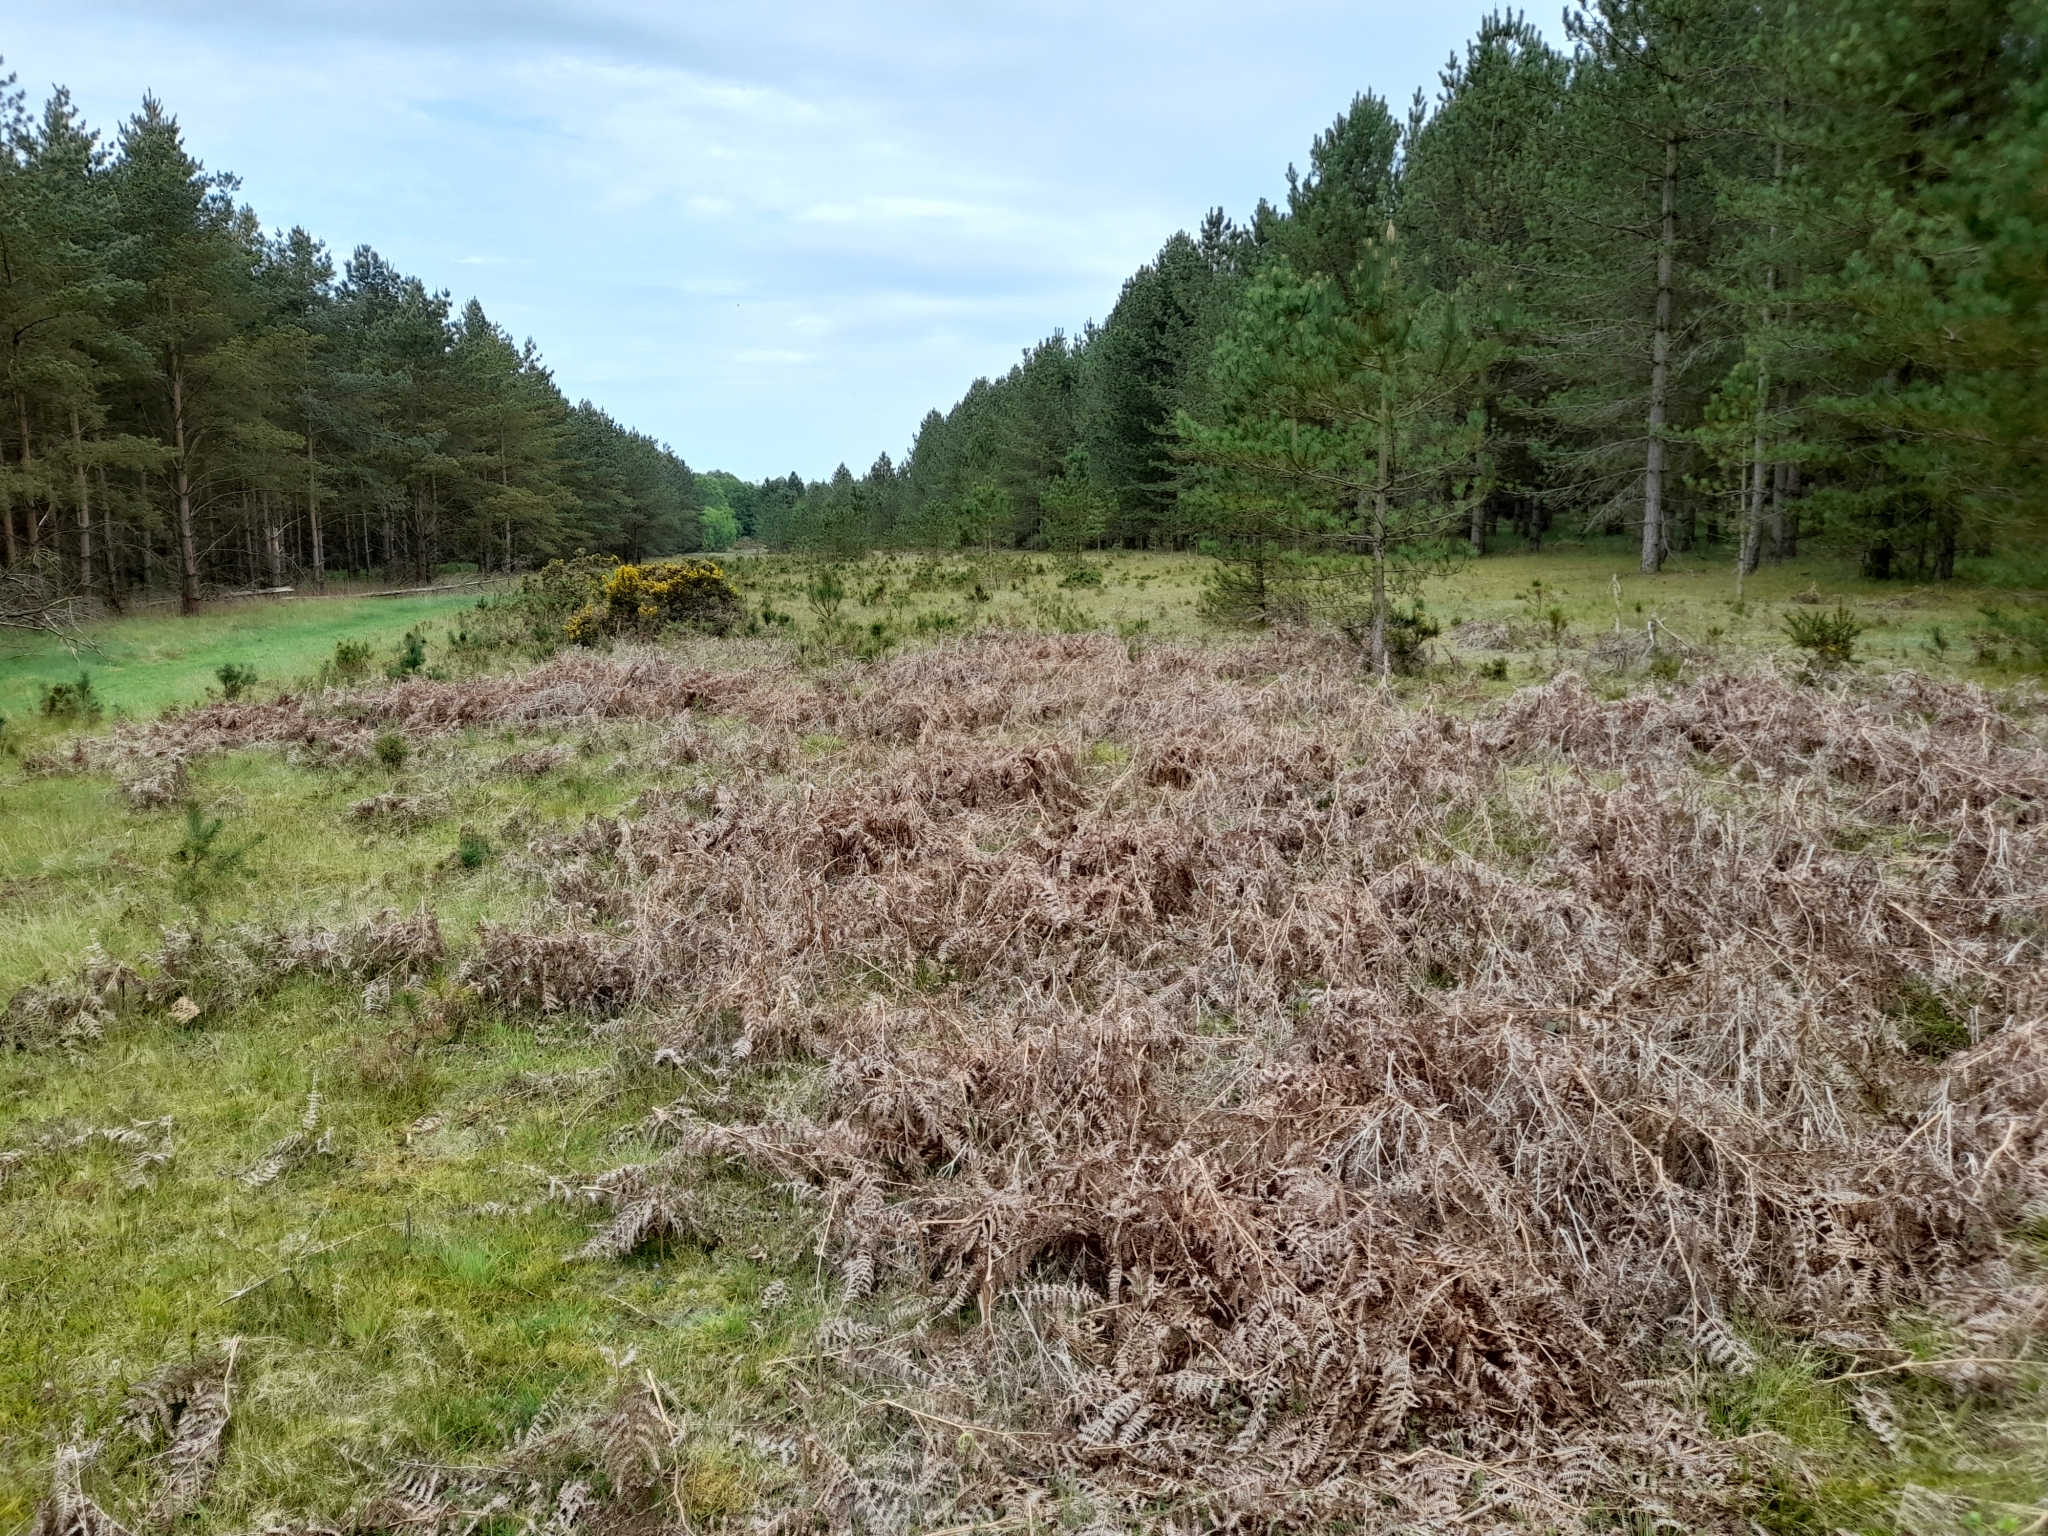 A photo from the FoTF Conservation Event - May 2022 - Self Sown Fir Removal at Kings Forest : A wide angle view of the work area